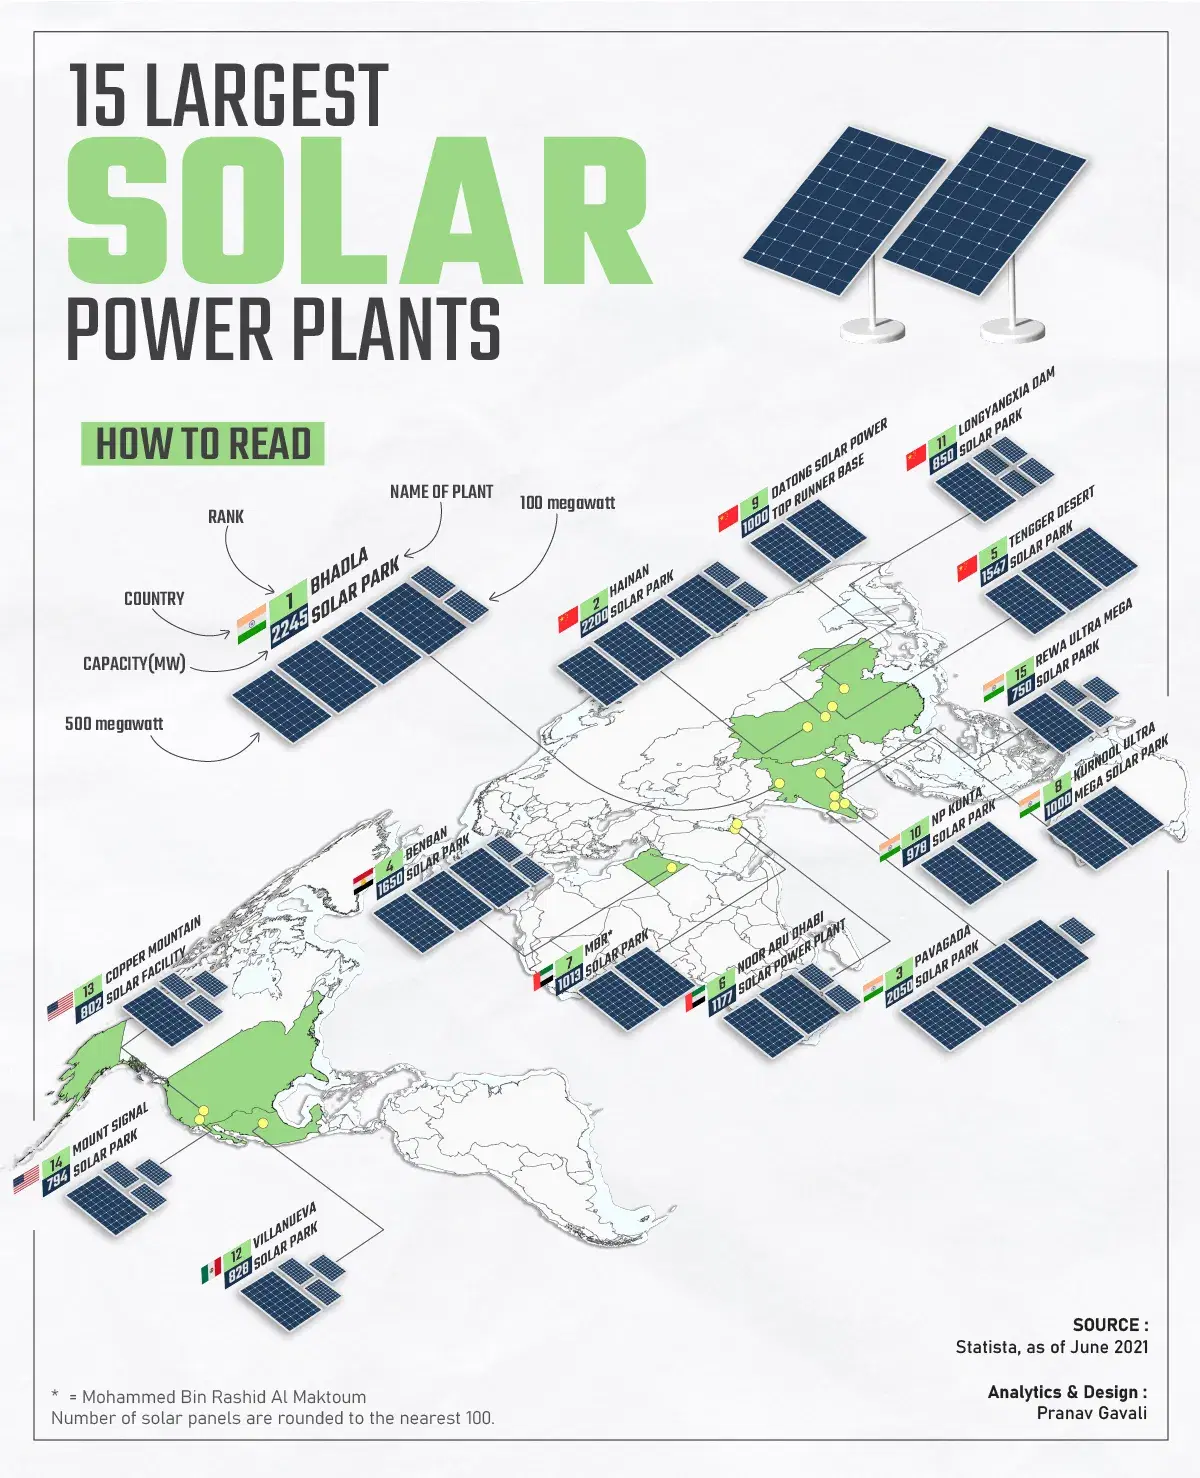 Where are the worlds largest Solar Power Plants?